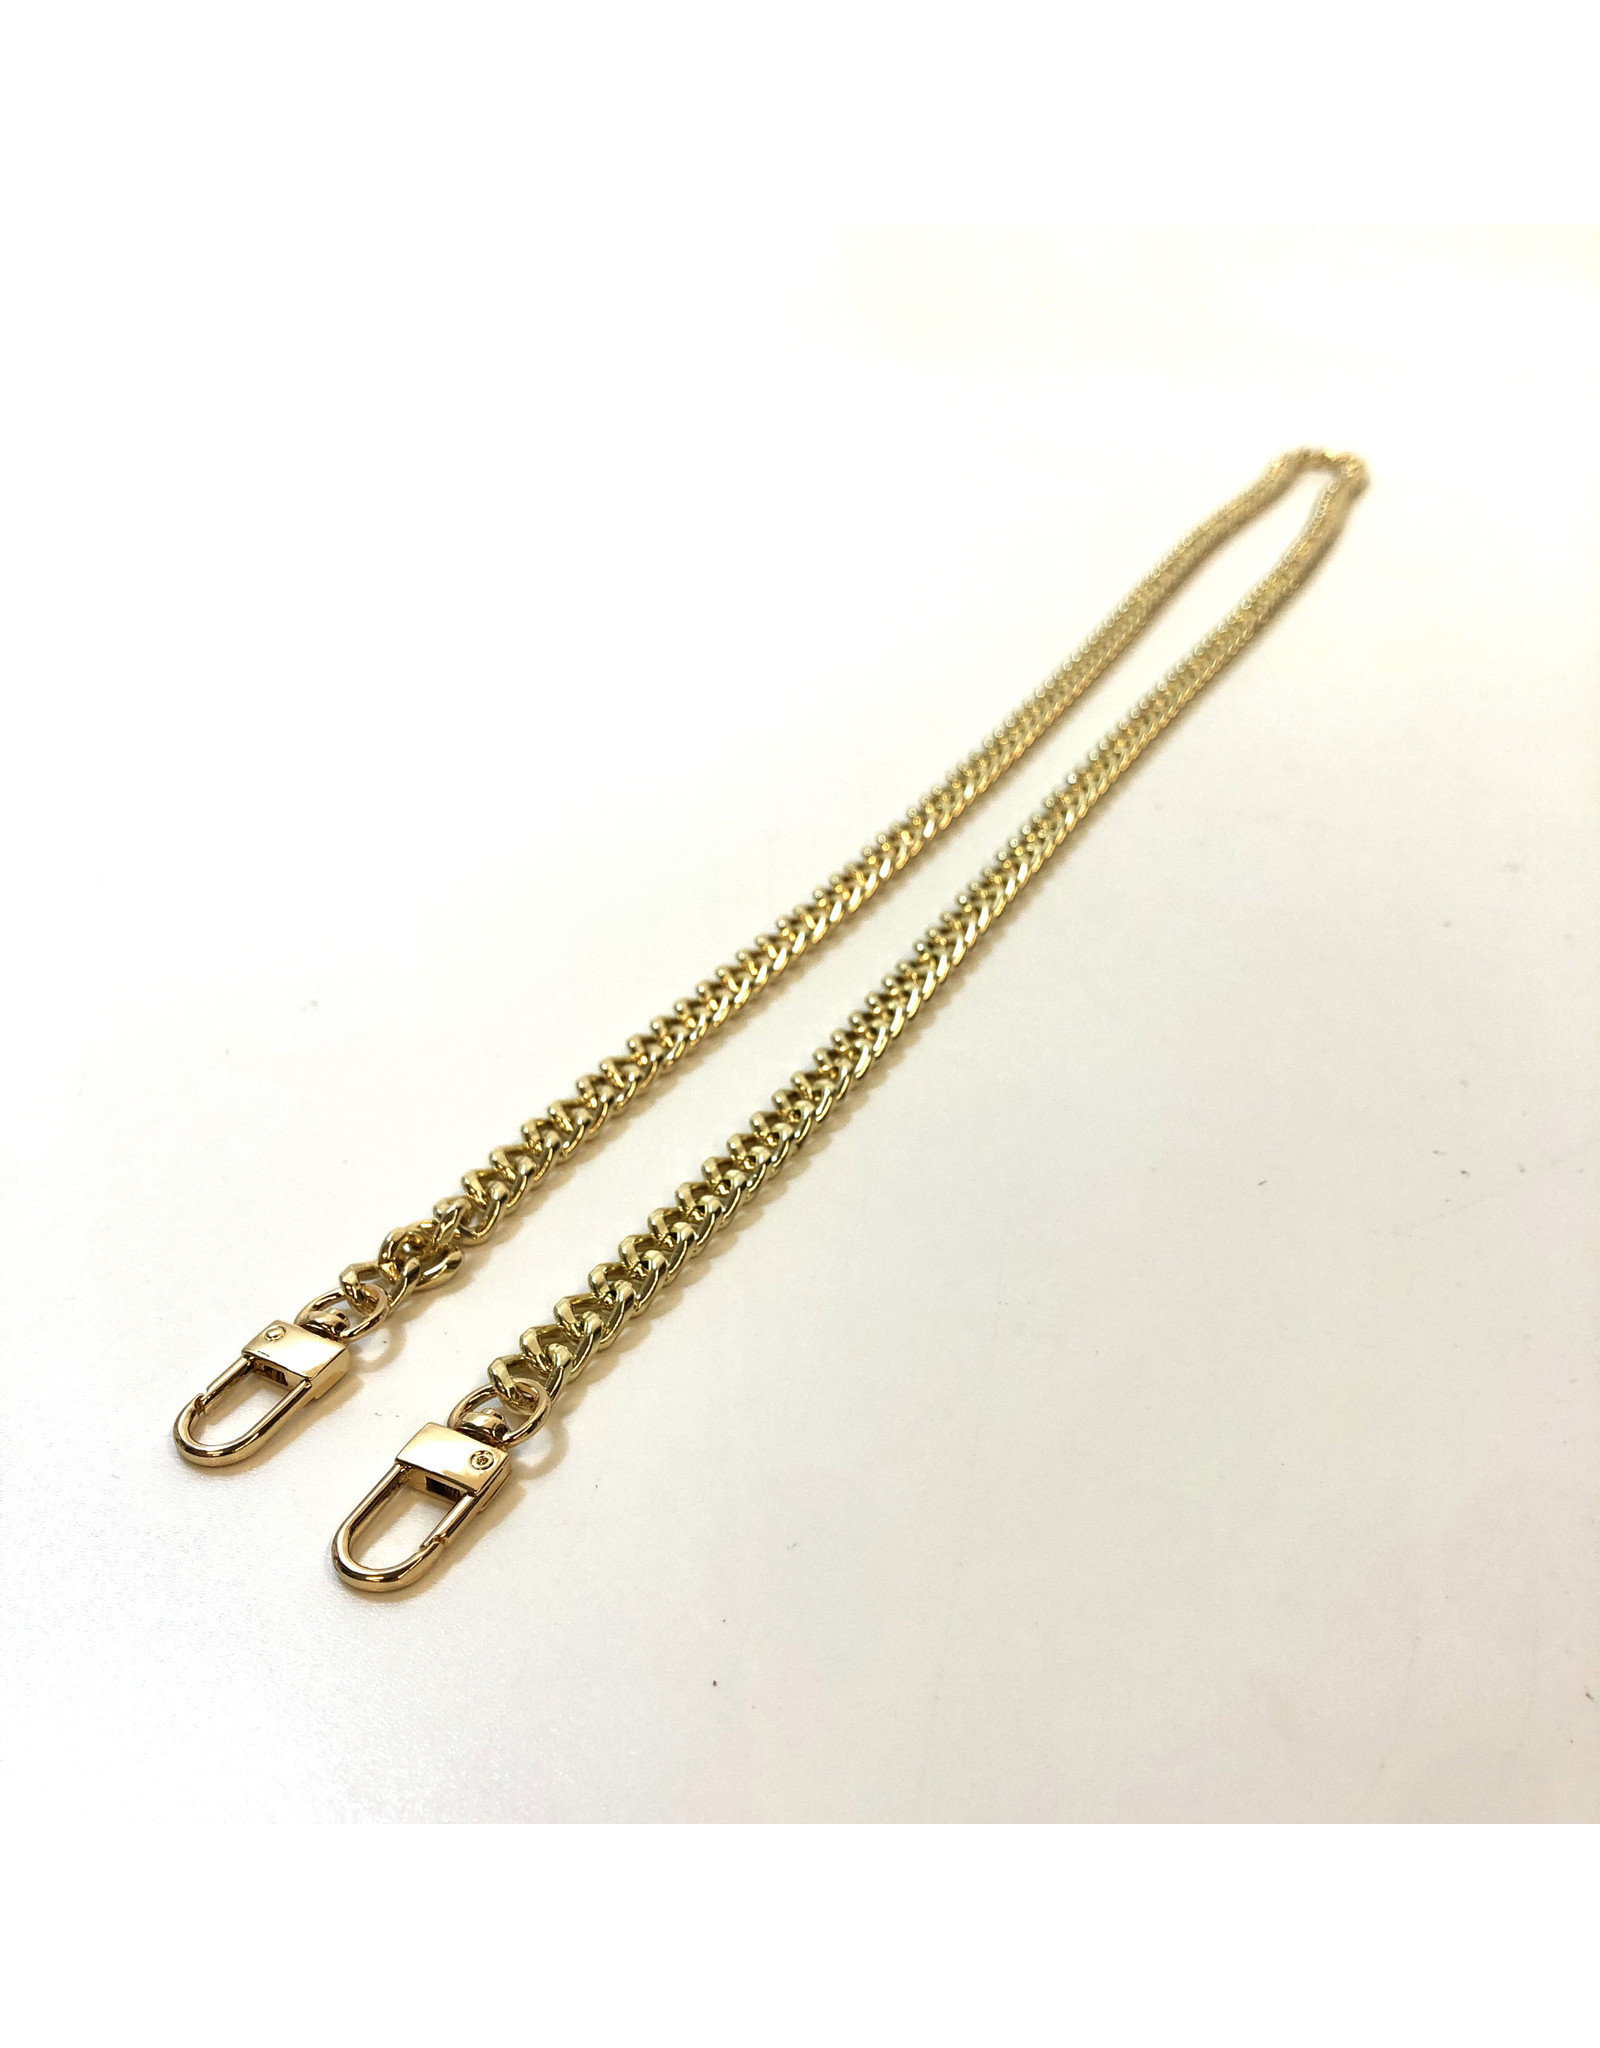 Chain with swivel snap hooks